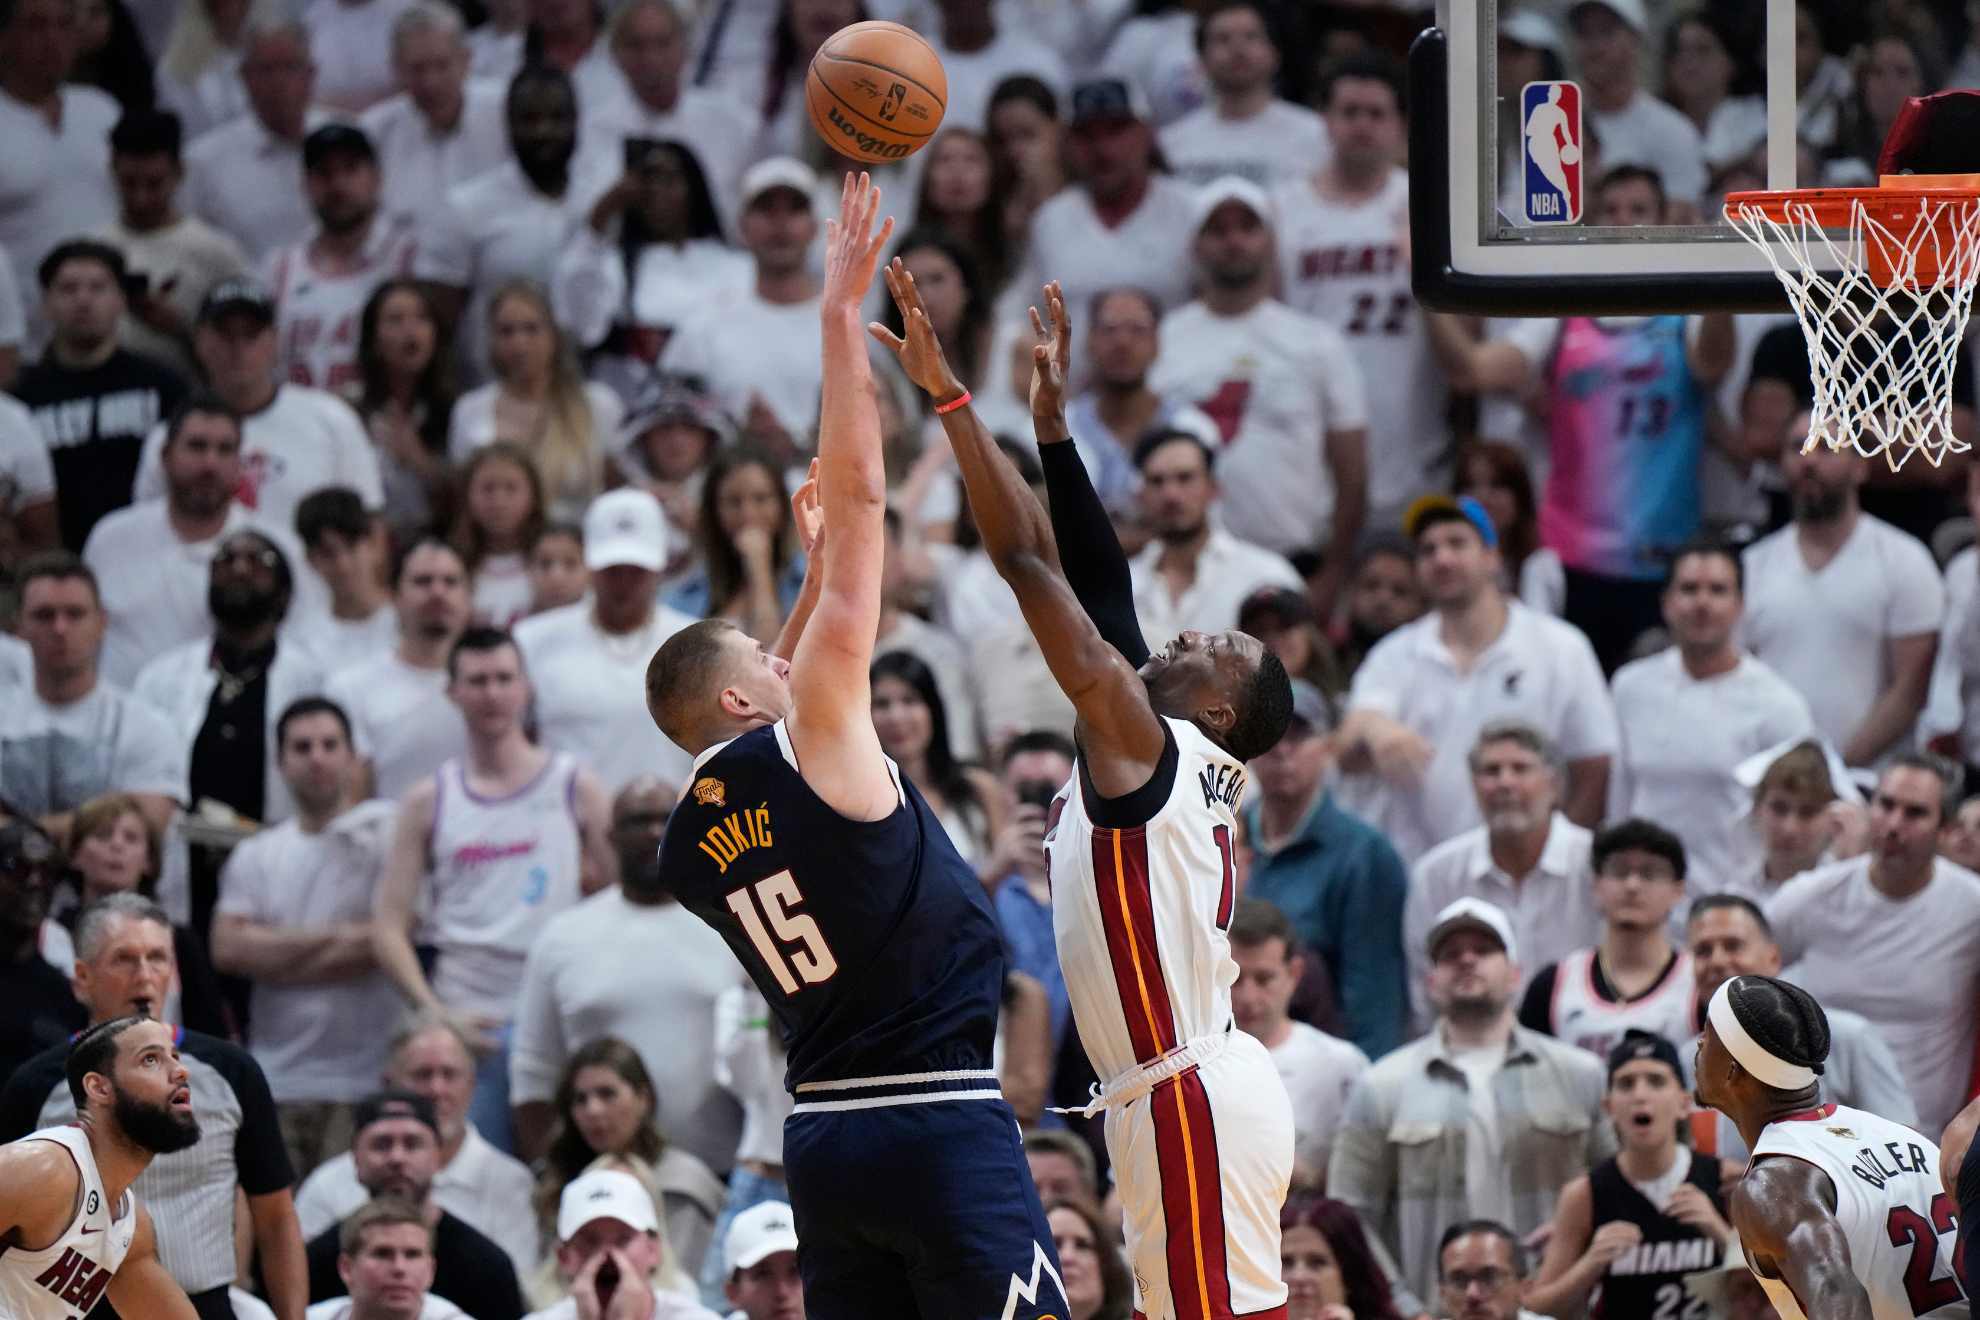 The Denver Nuggets won Game 4 of the NBA Finals in spectacular fashion.